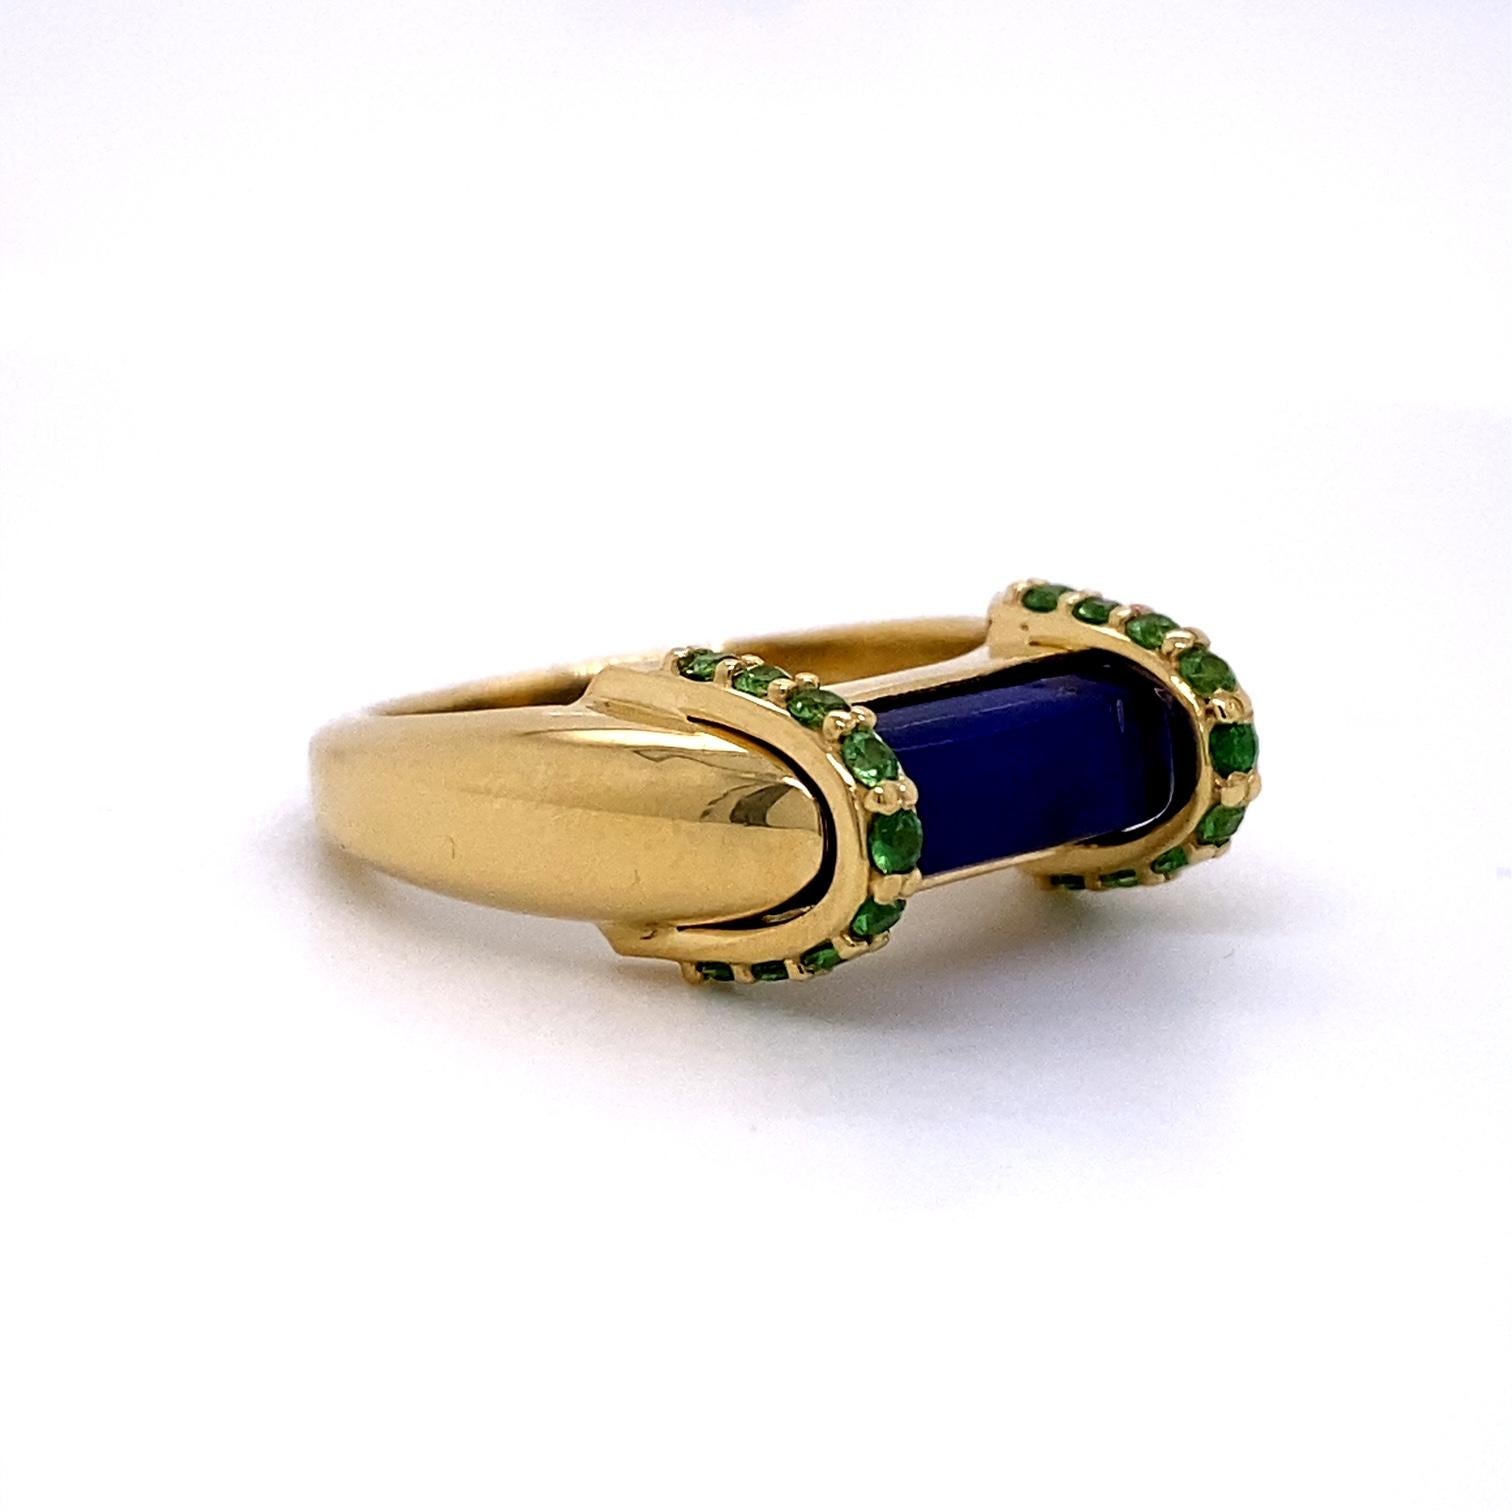 An 18 yellow gold ring set with a 2.68 carat lapis lazuli and two straps of 1.6mm tsavorite garnets for a total of .36 carats. Ring size 7. This ring was made and designed by llyn strong.